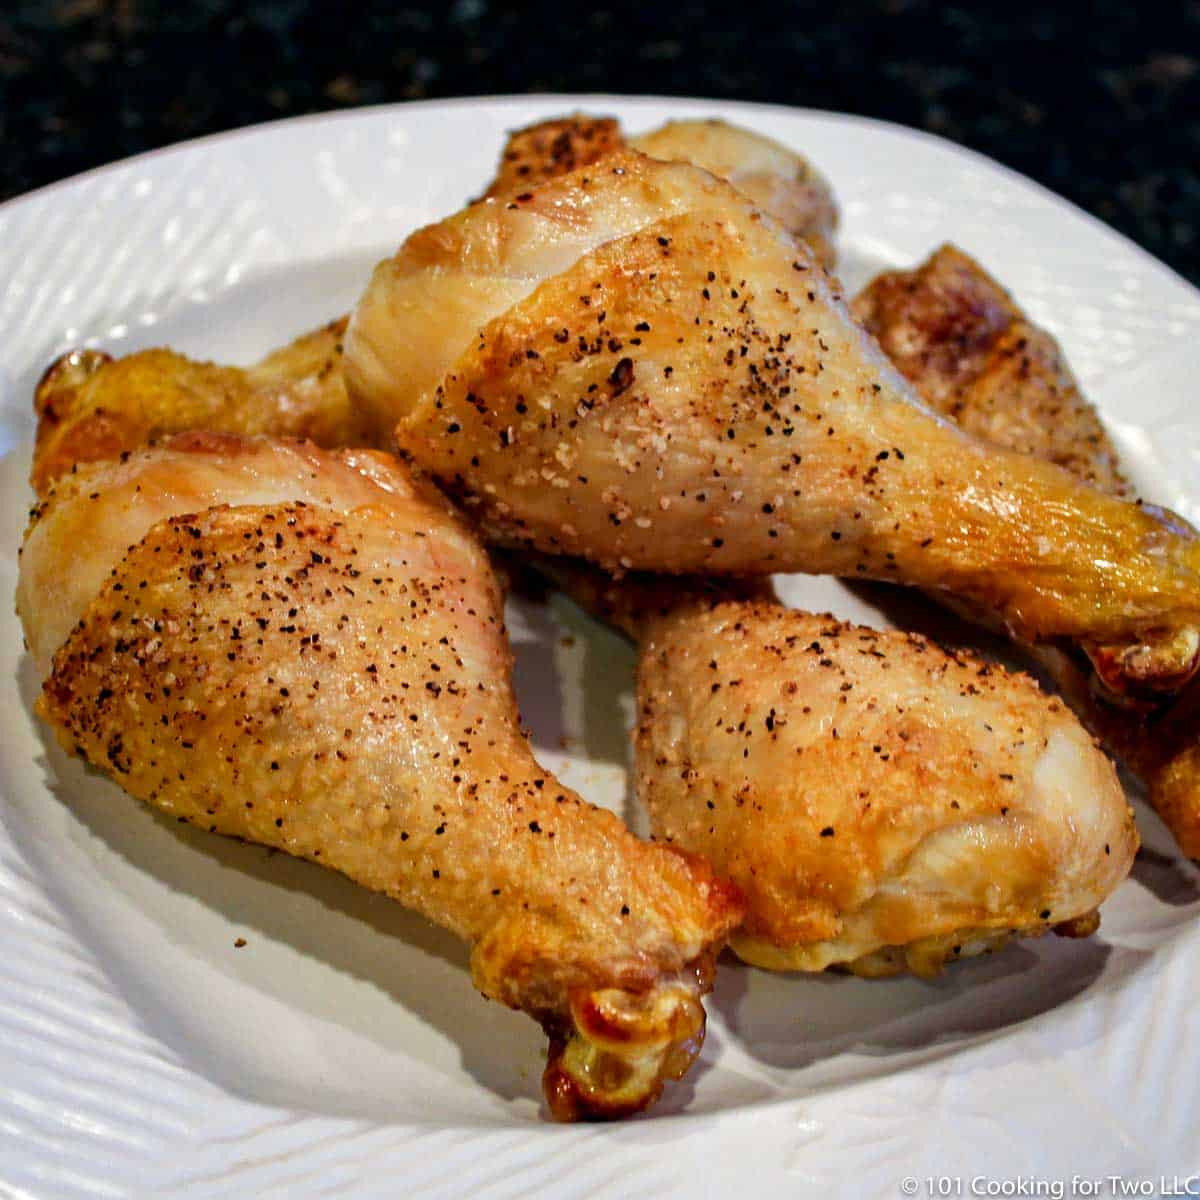 Baking Chicken Legs In the Oven New Oven Baked Chicken Legs the Art Of Drummies – 101